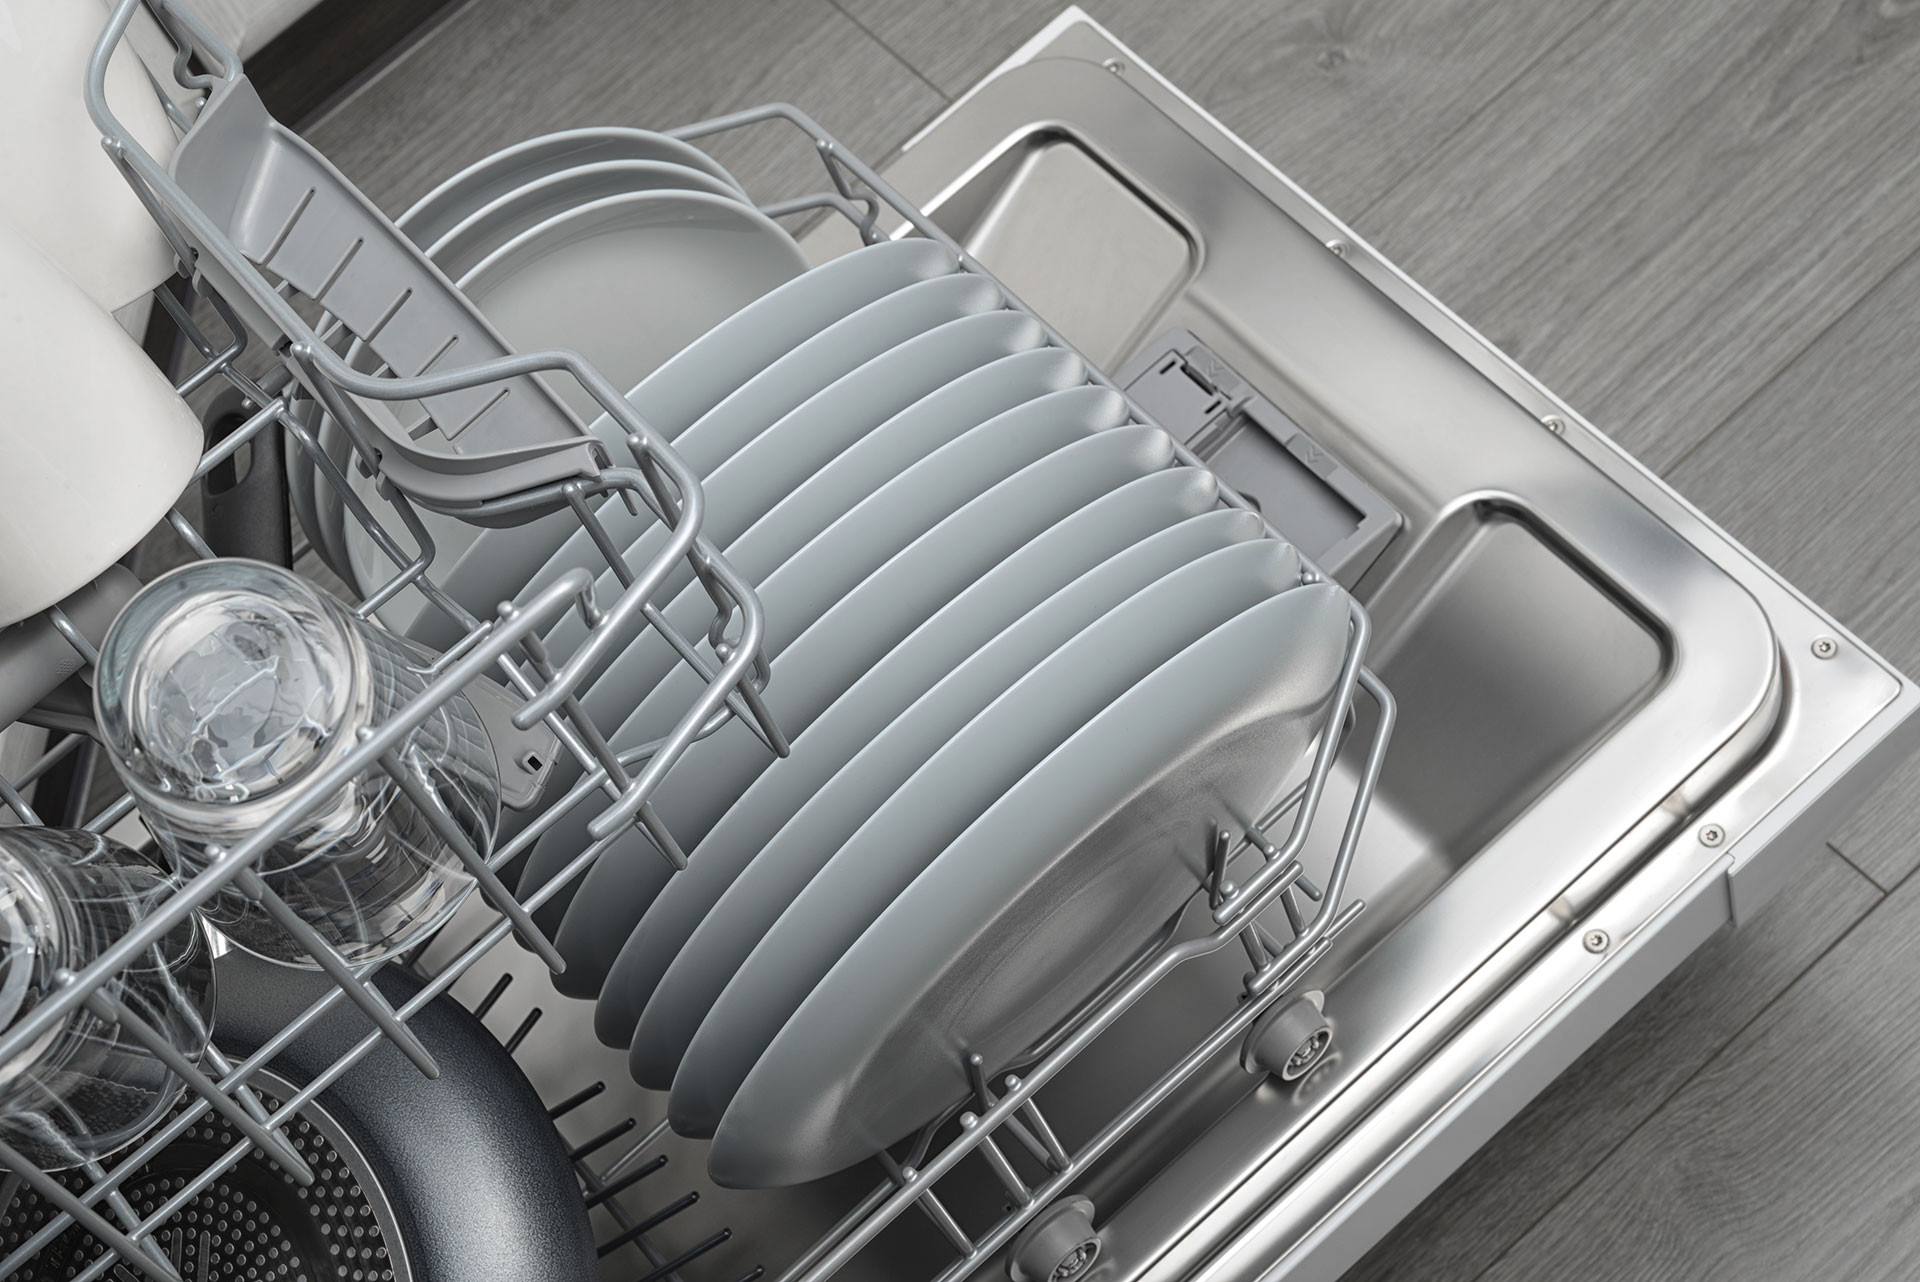 How to insulate dishwasher: DIY project  Blanket insulation, Sound  proofing, Insulation